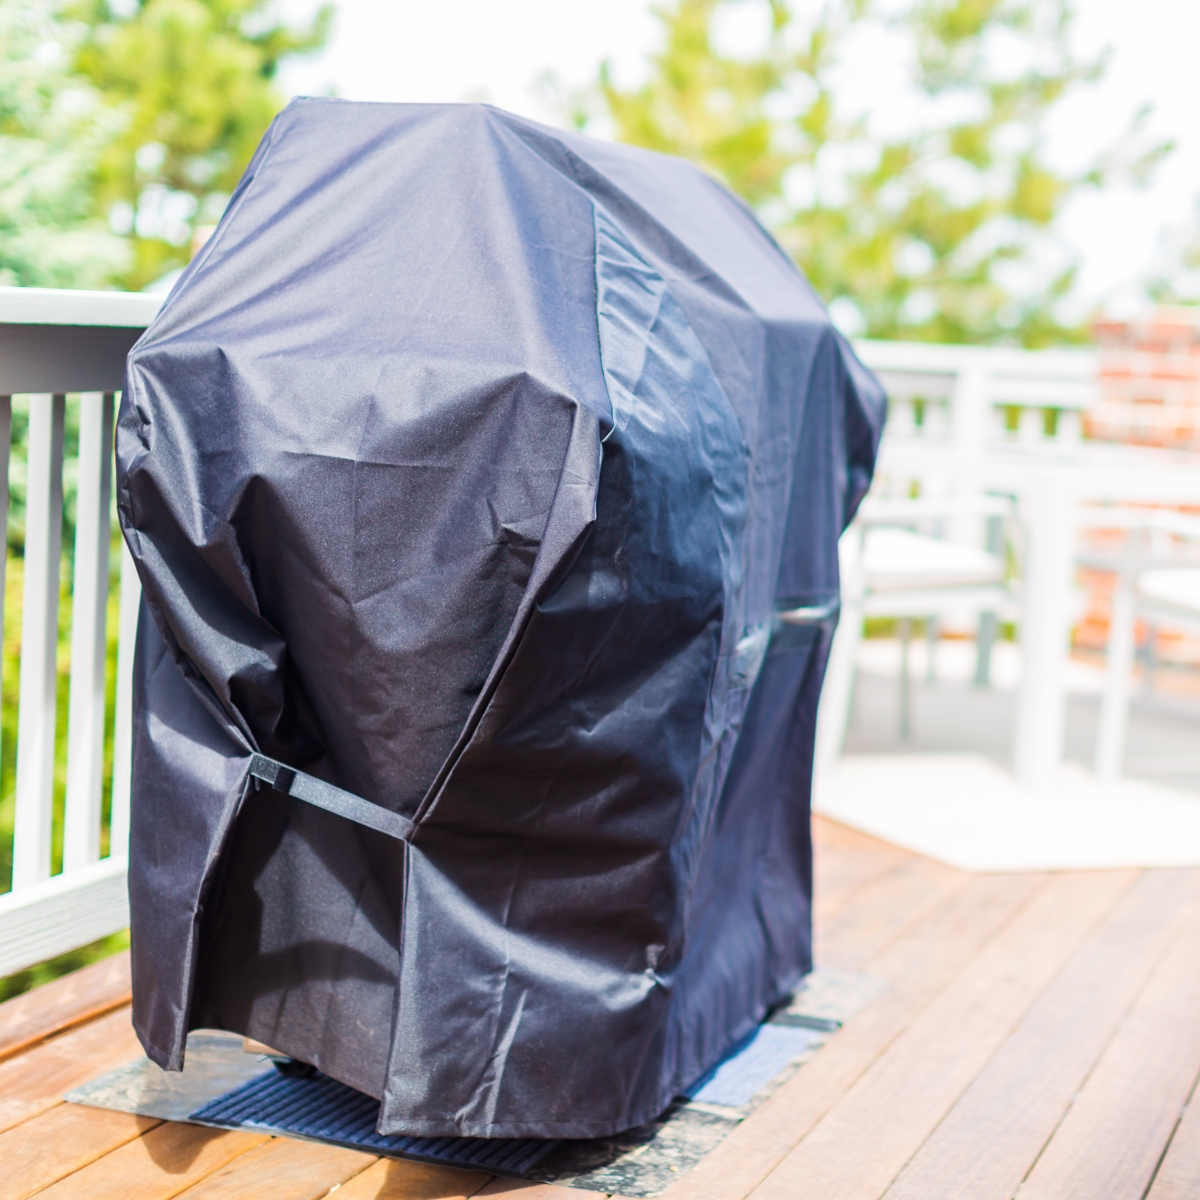 What is a grill cover